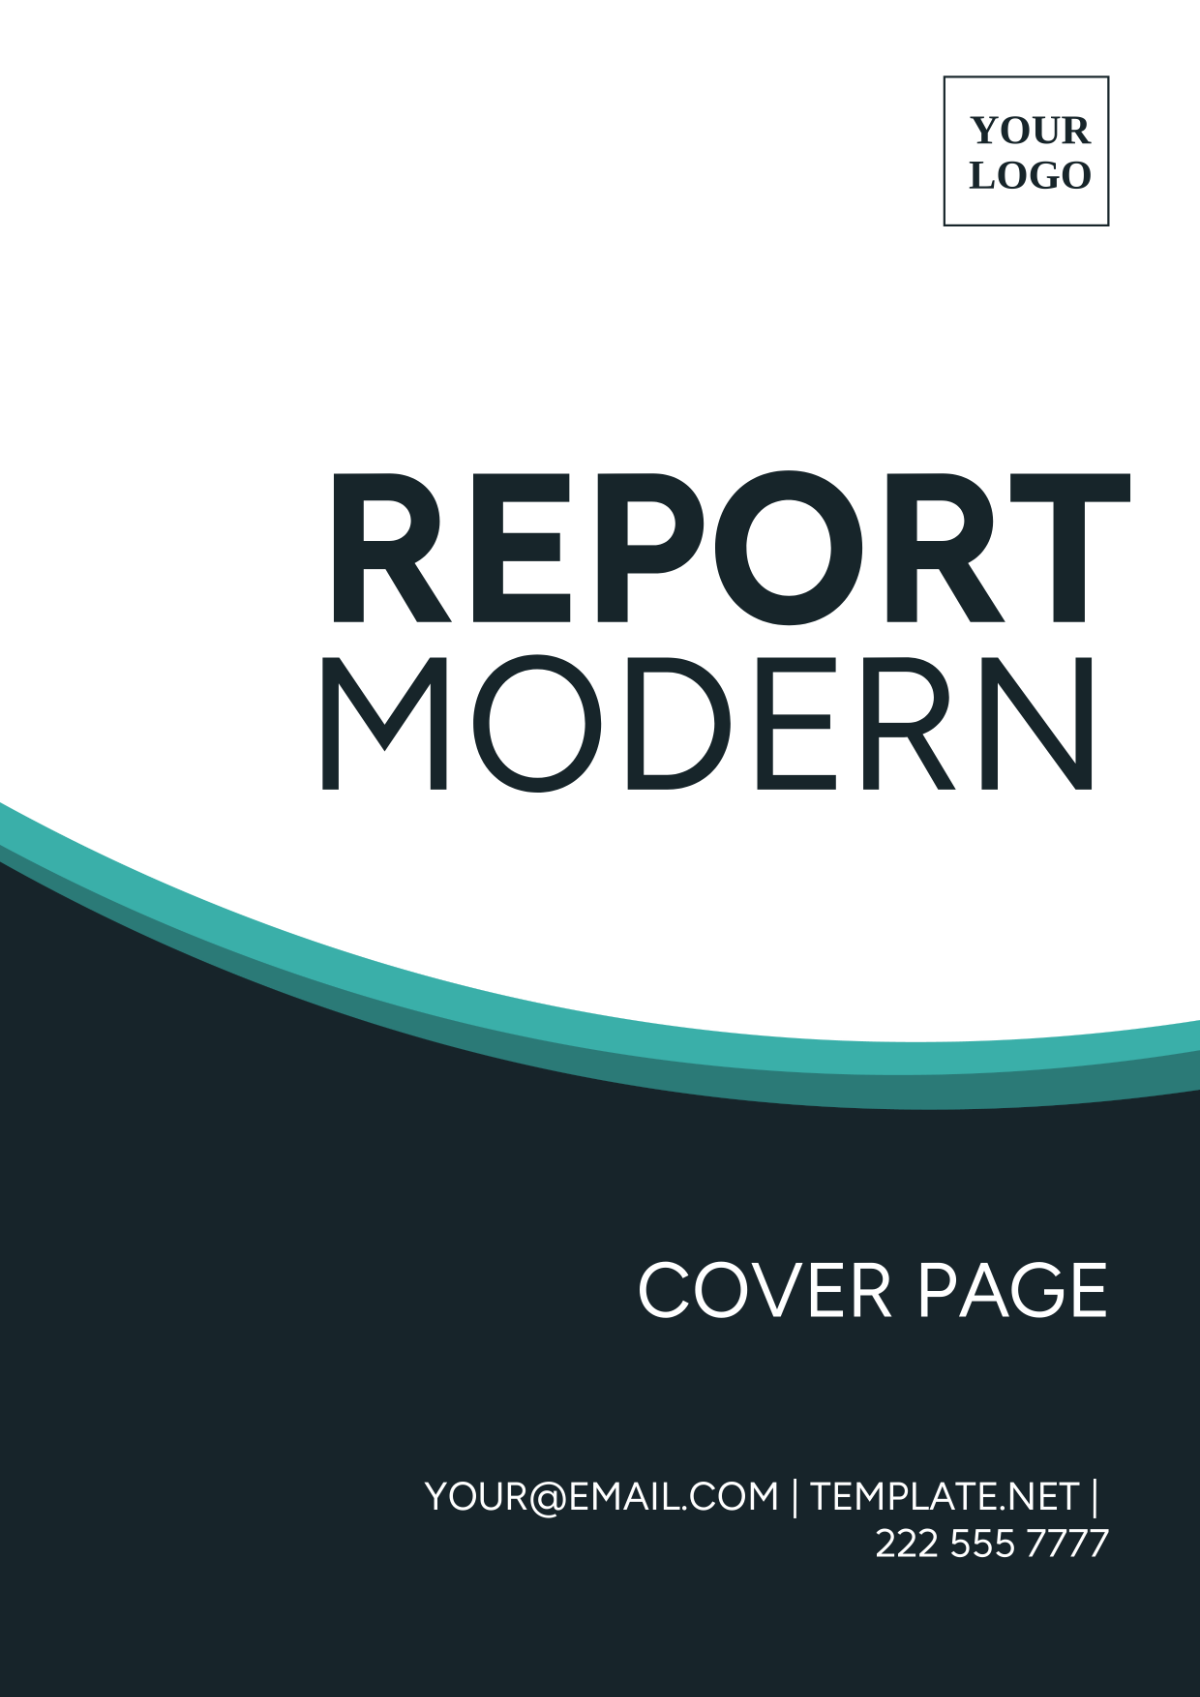 Report Modern Cover Page Template